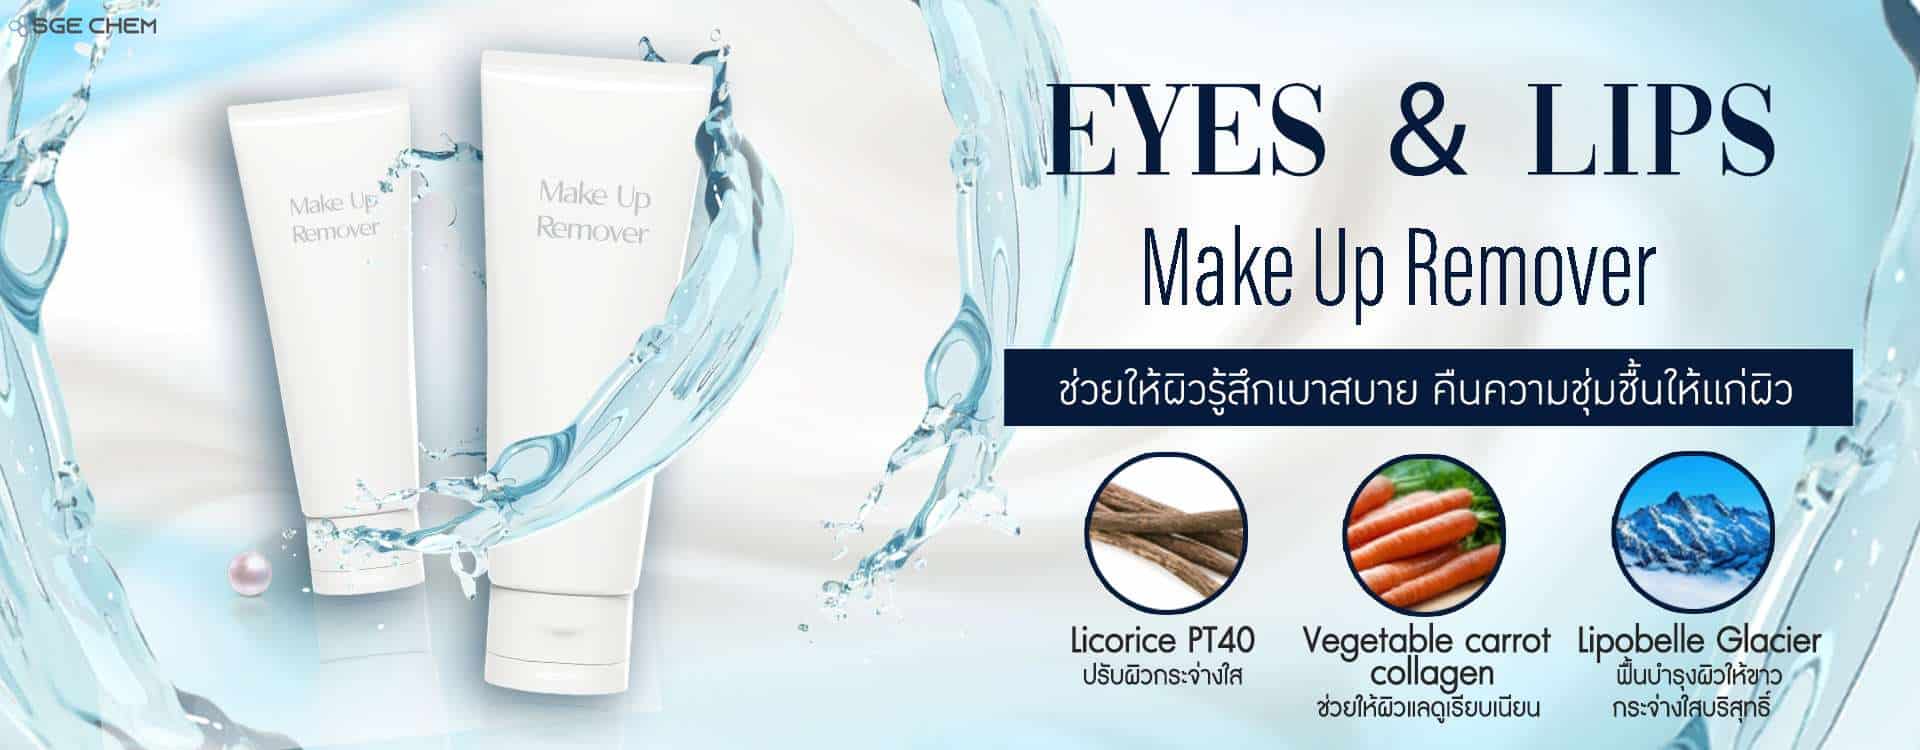 Eyes & Lips Make Up Remover